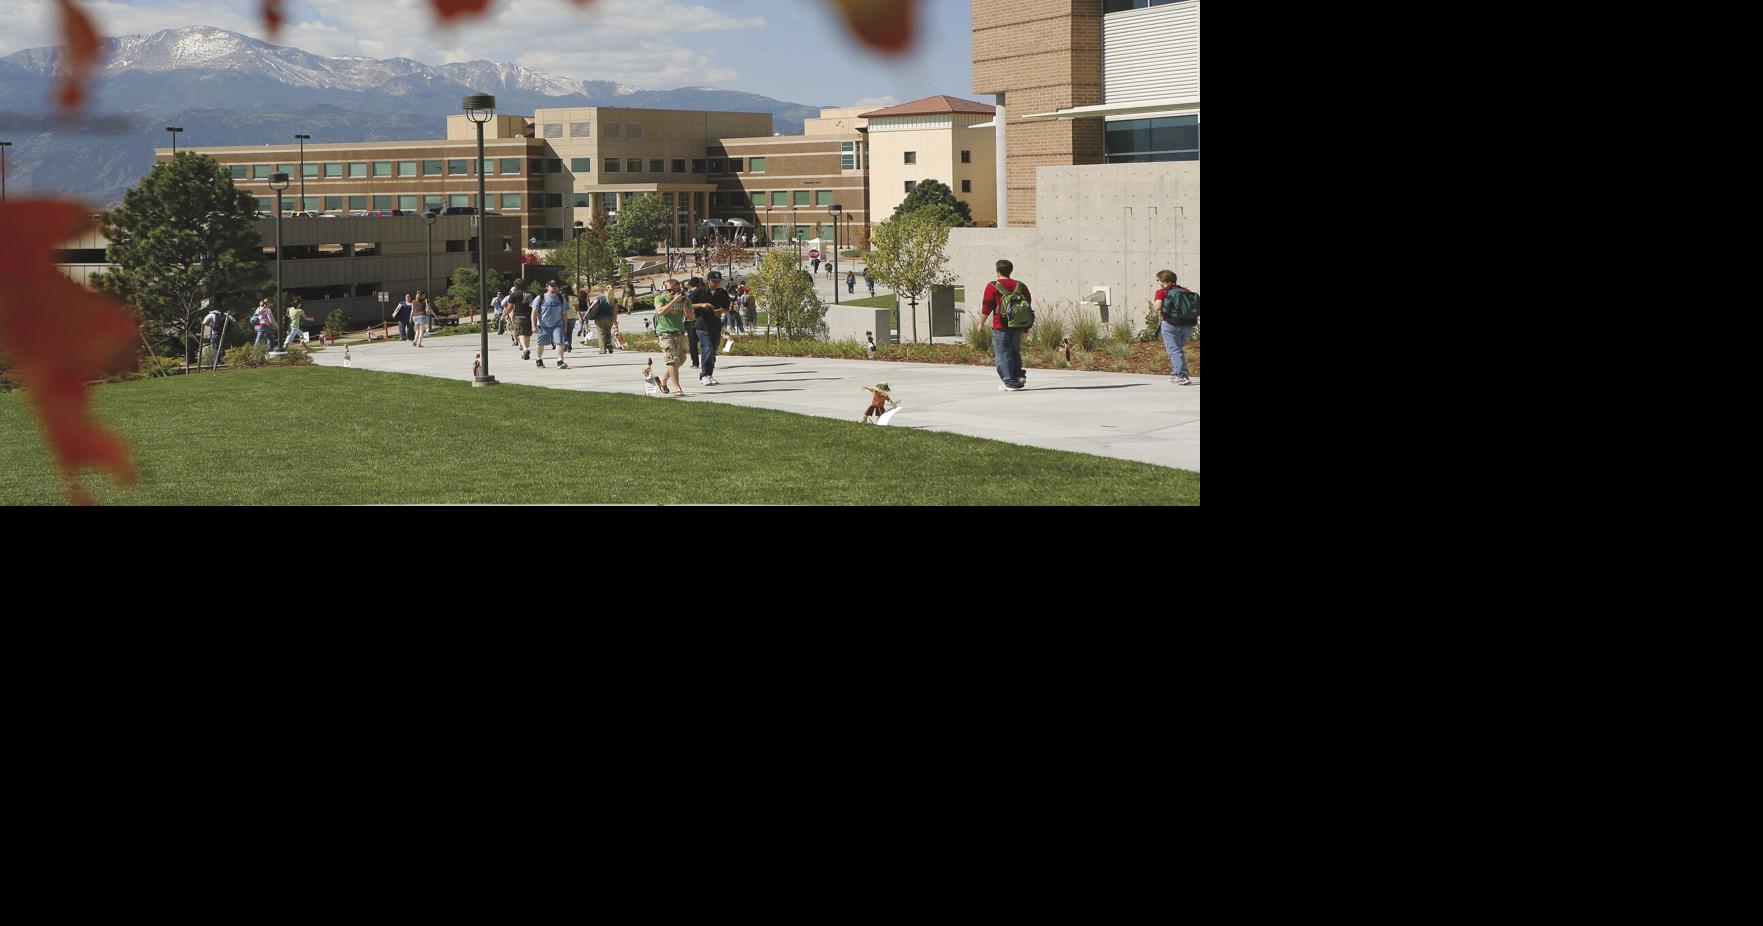 UCCS enrollment hits all time high with 9,850 students Daily News